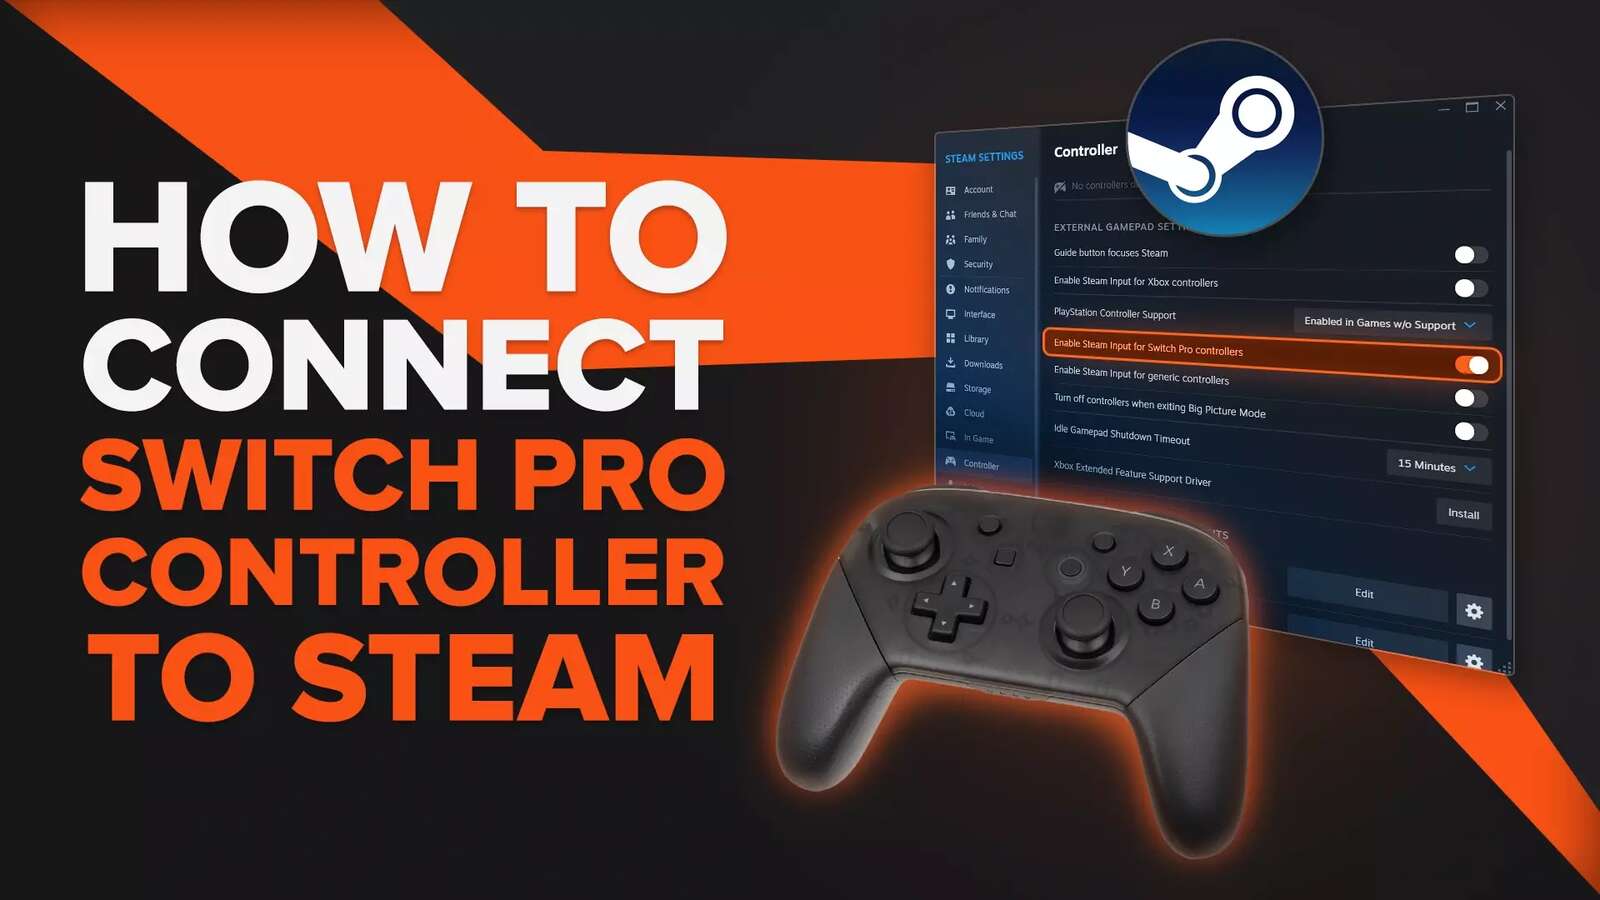 How to Connect a Nintendo Switch Pro Controller to Steam